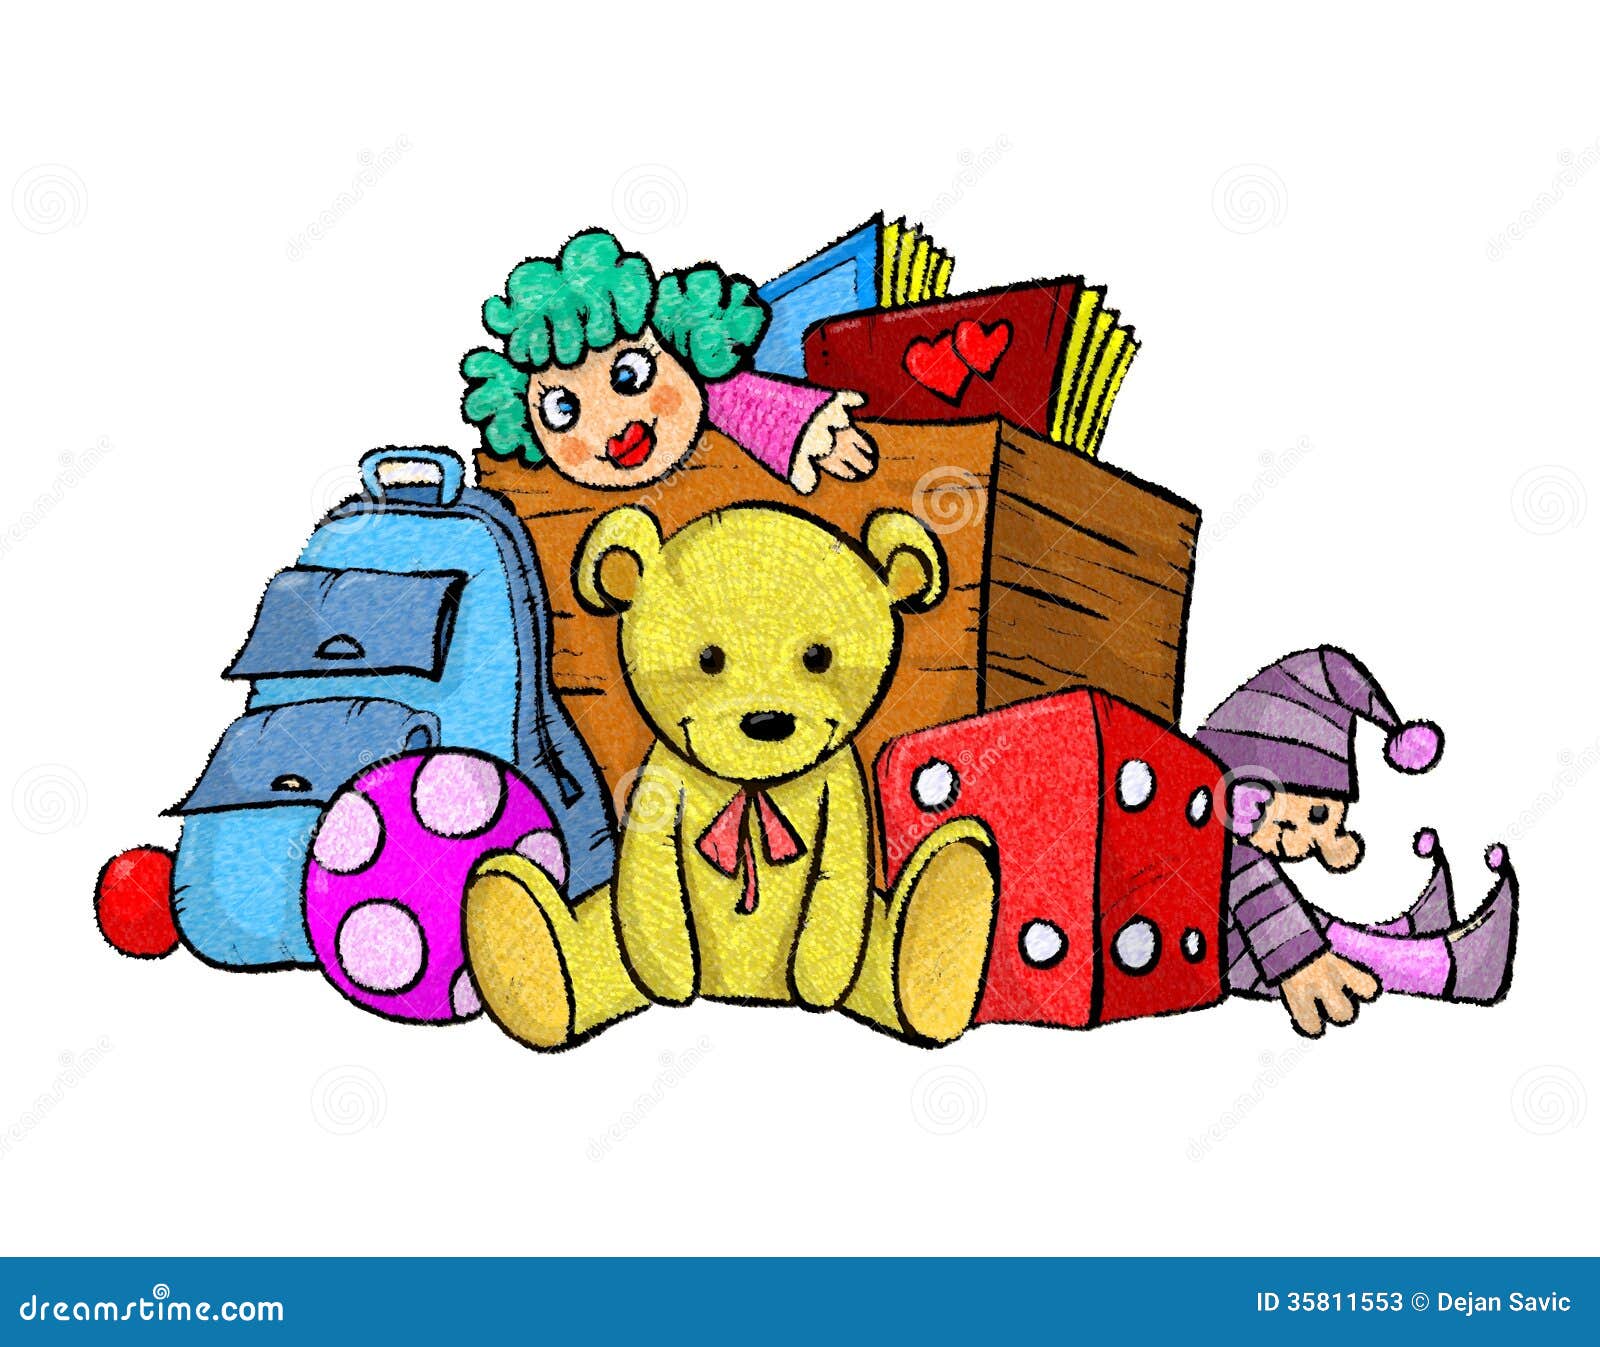 clipart of toys and games - photo #10